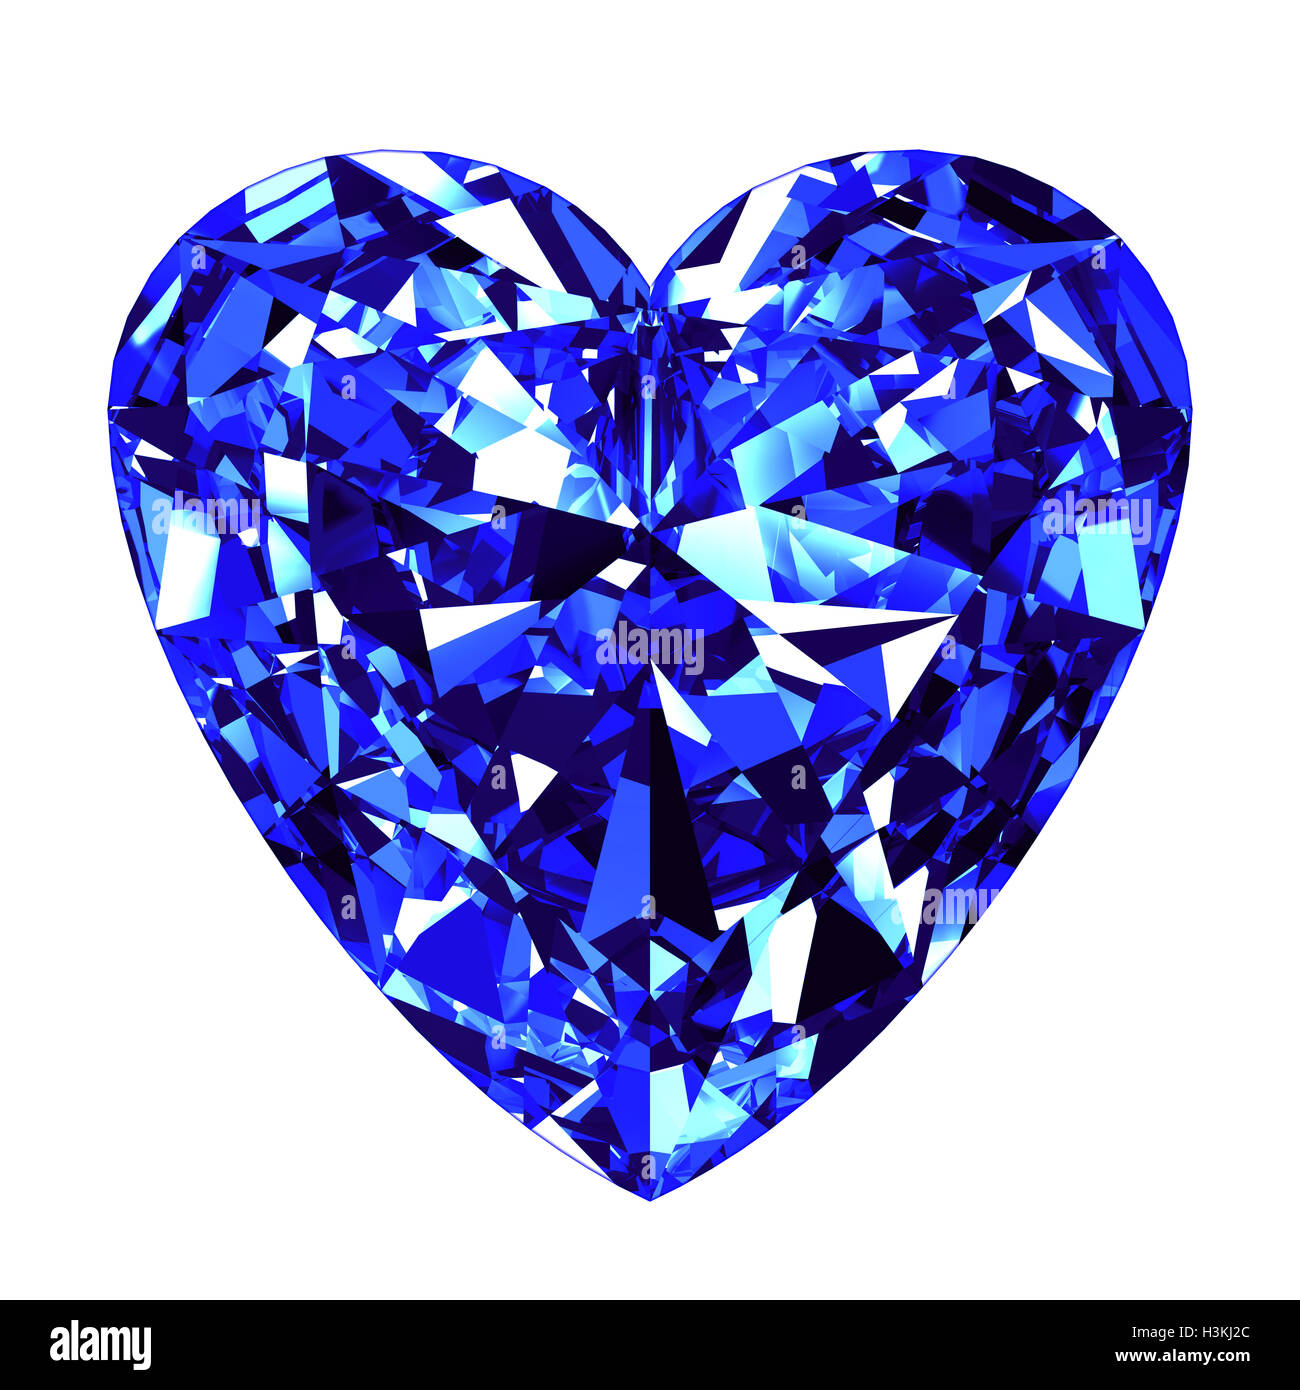 Sapphire Heart Cut Over White Background. 3D Illustration. Stock Photo